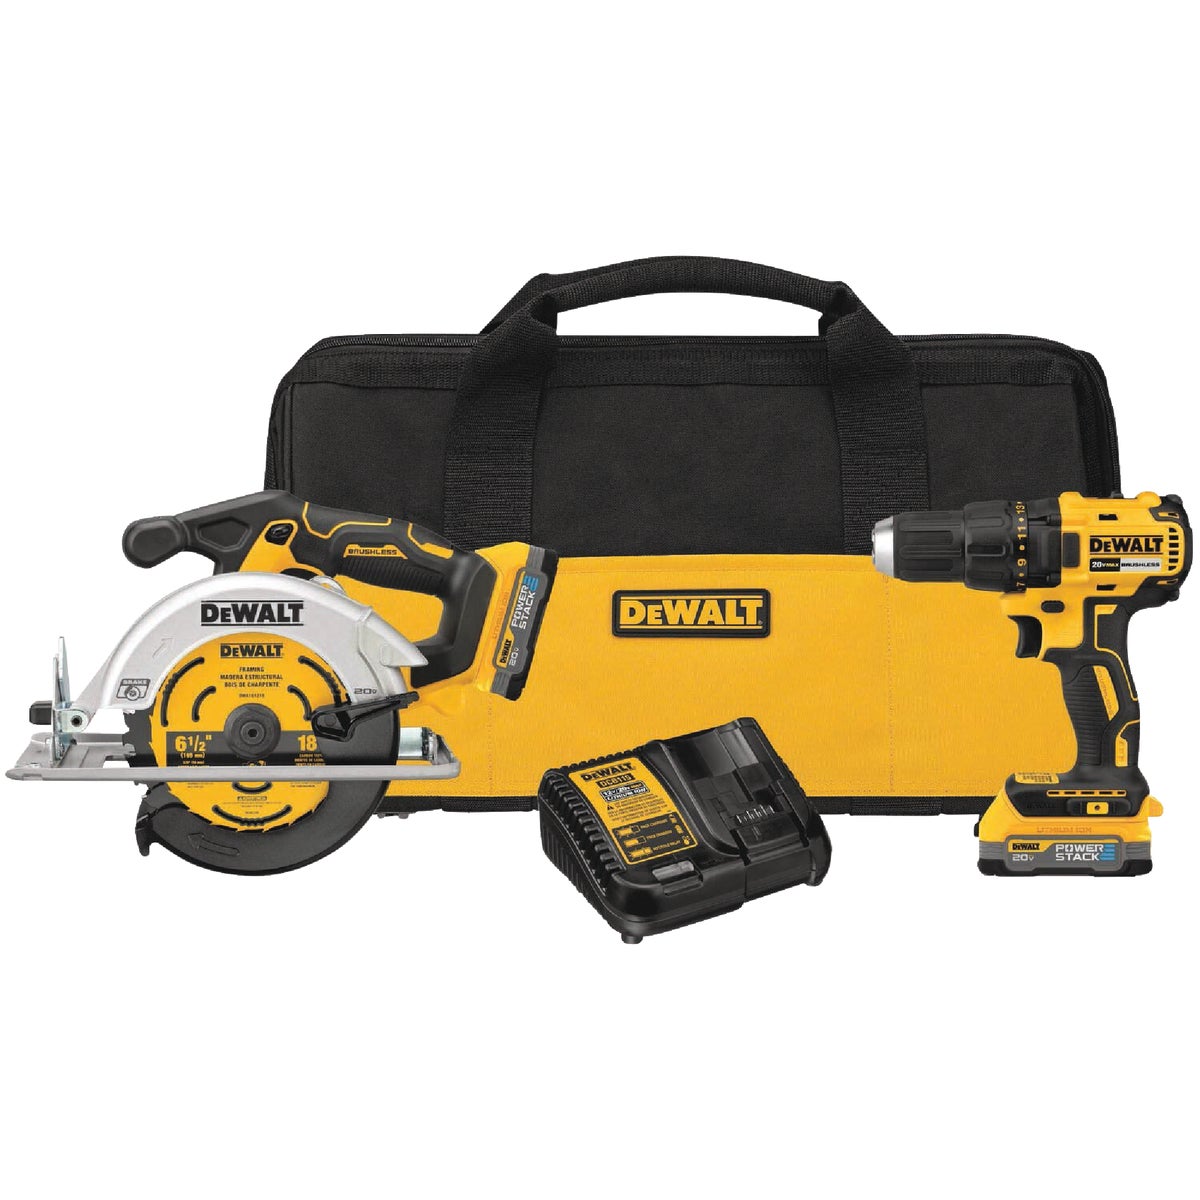 DEWALT 2-Tool 20V MAX Lithium-Ion Brushless Drill/Driver & Circular Saw Cordless Tool Combo Kit with 2 POWERSTACK Batteries